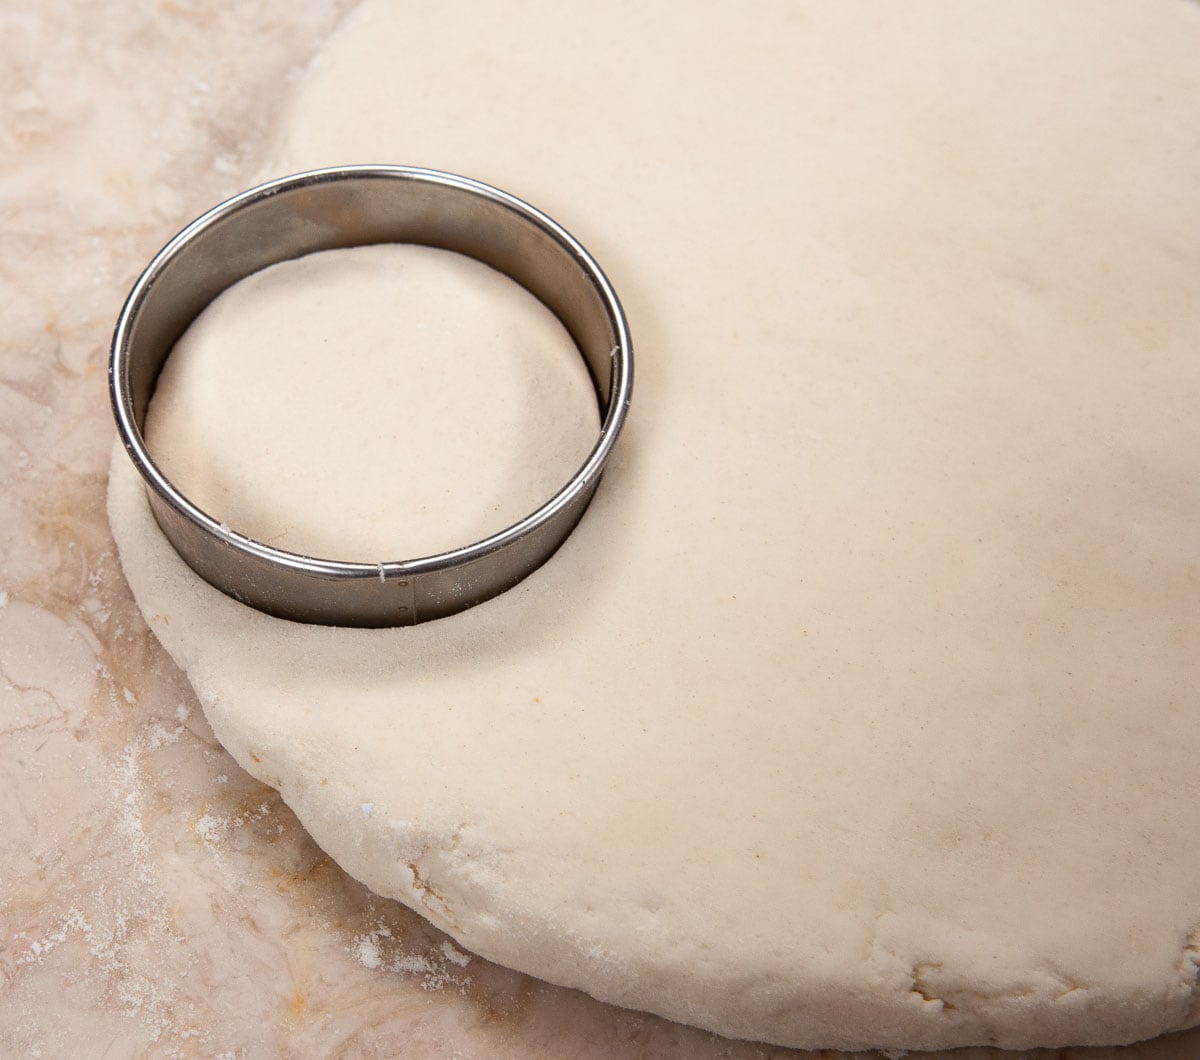 The dough has been flattened to ½" and a cutter is in place.